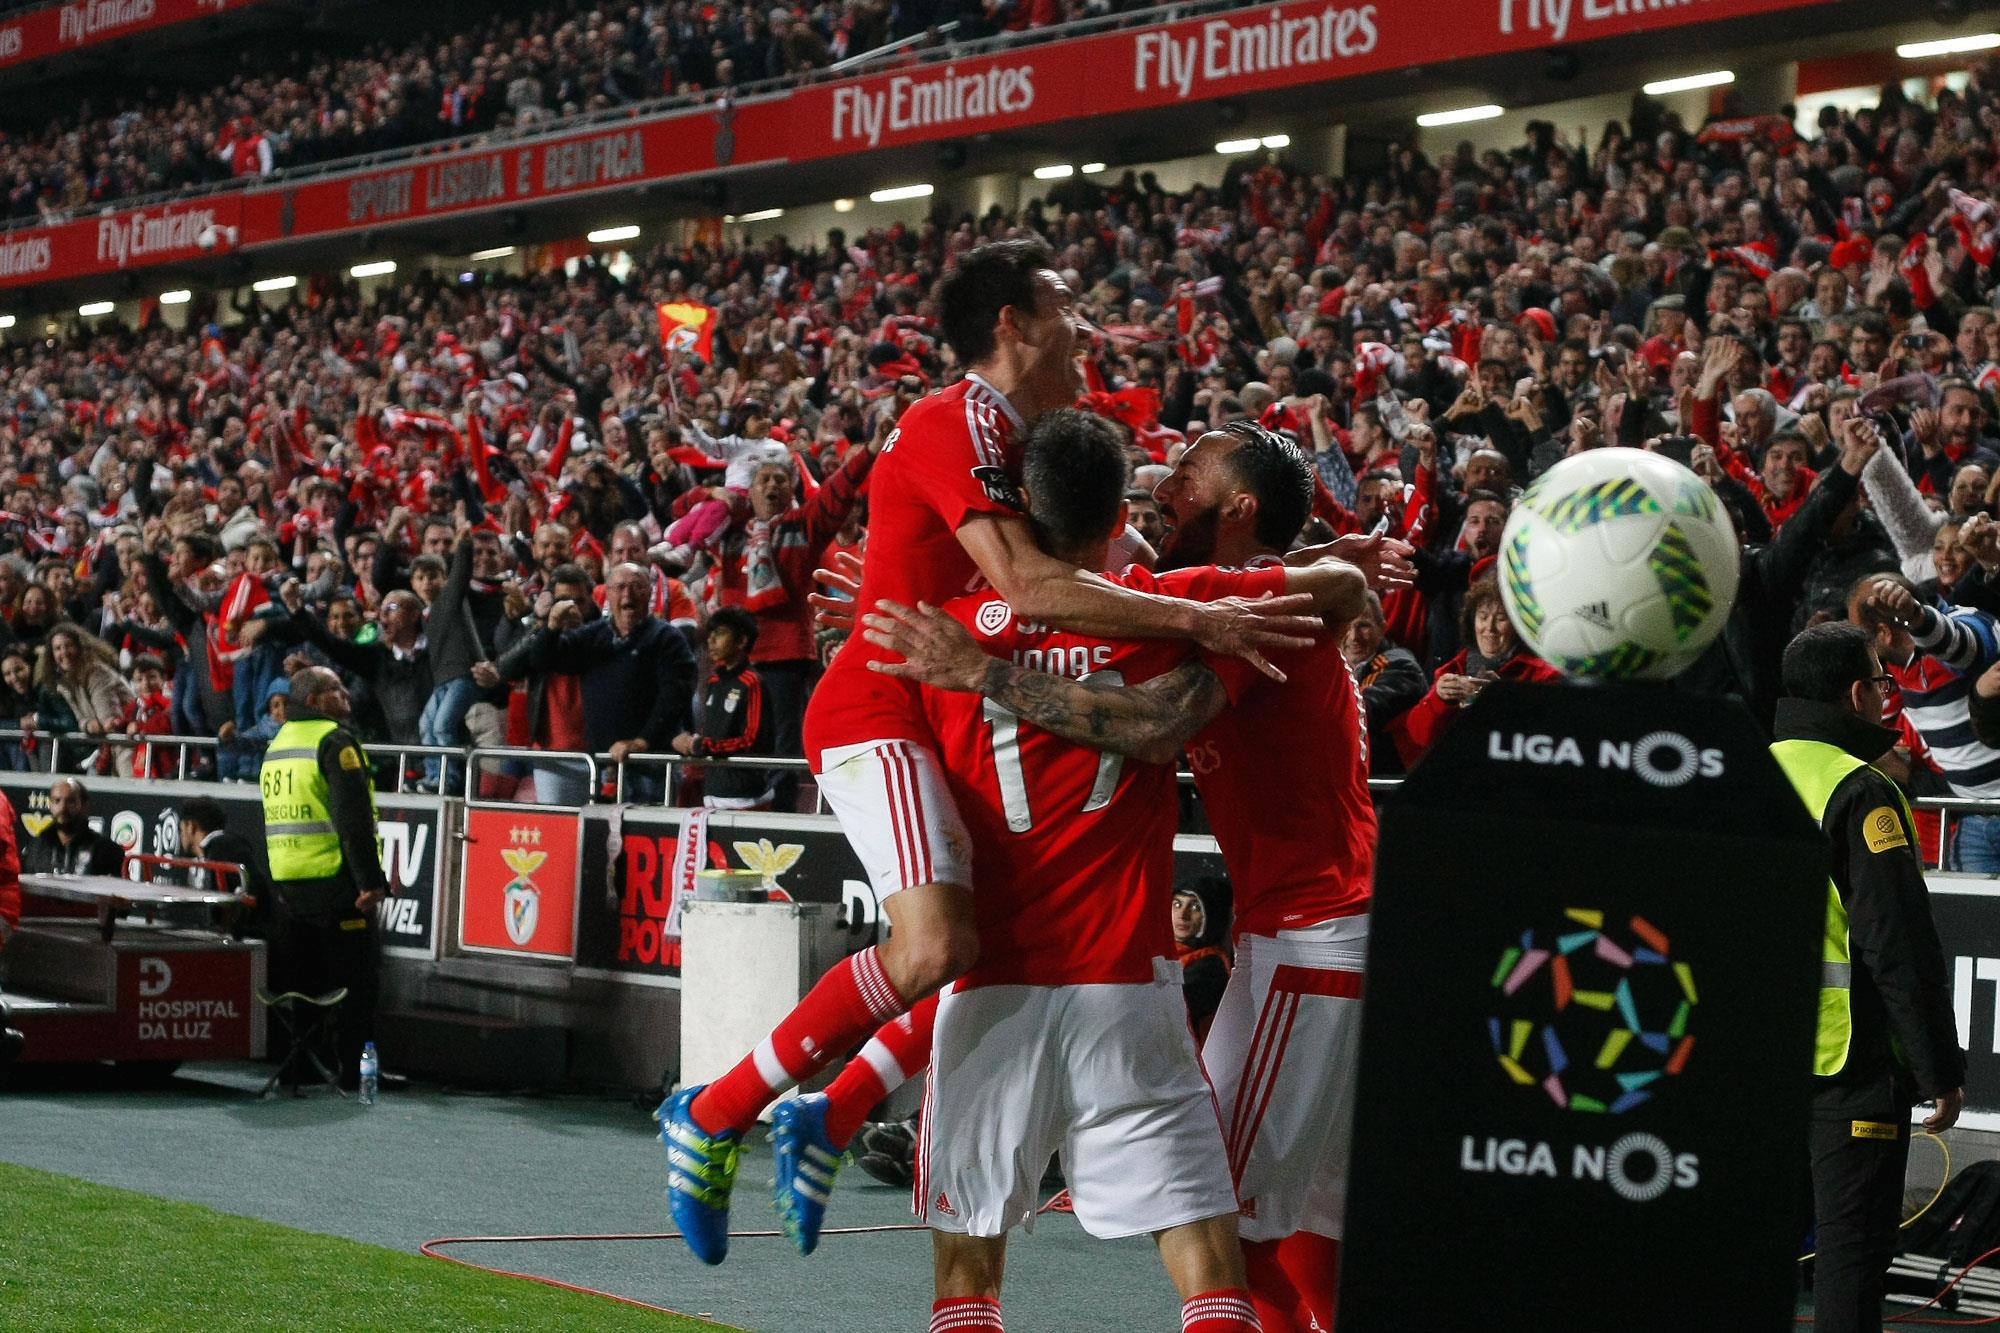 benfica match today